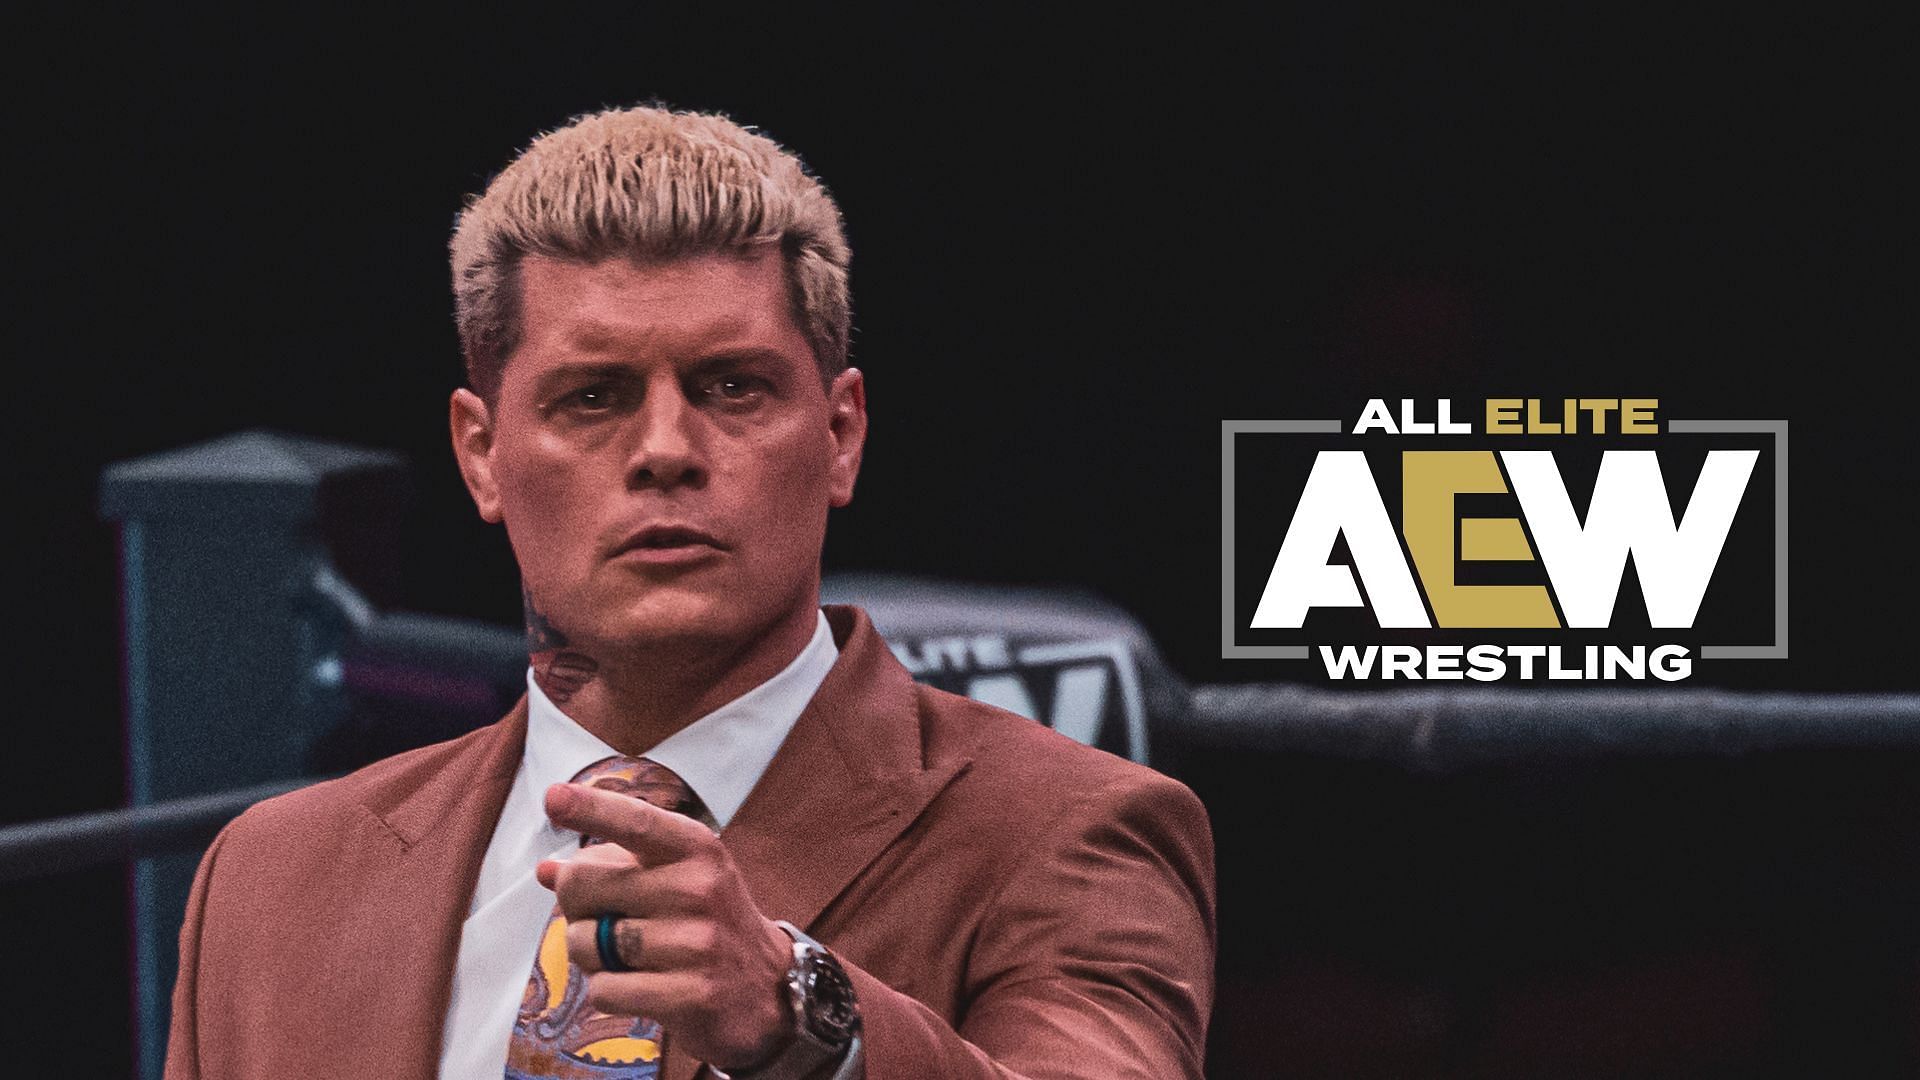 Will two AEW stars join Cody Rhodes in WWE?